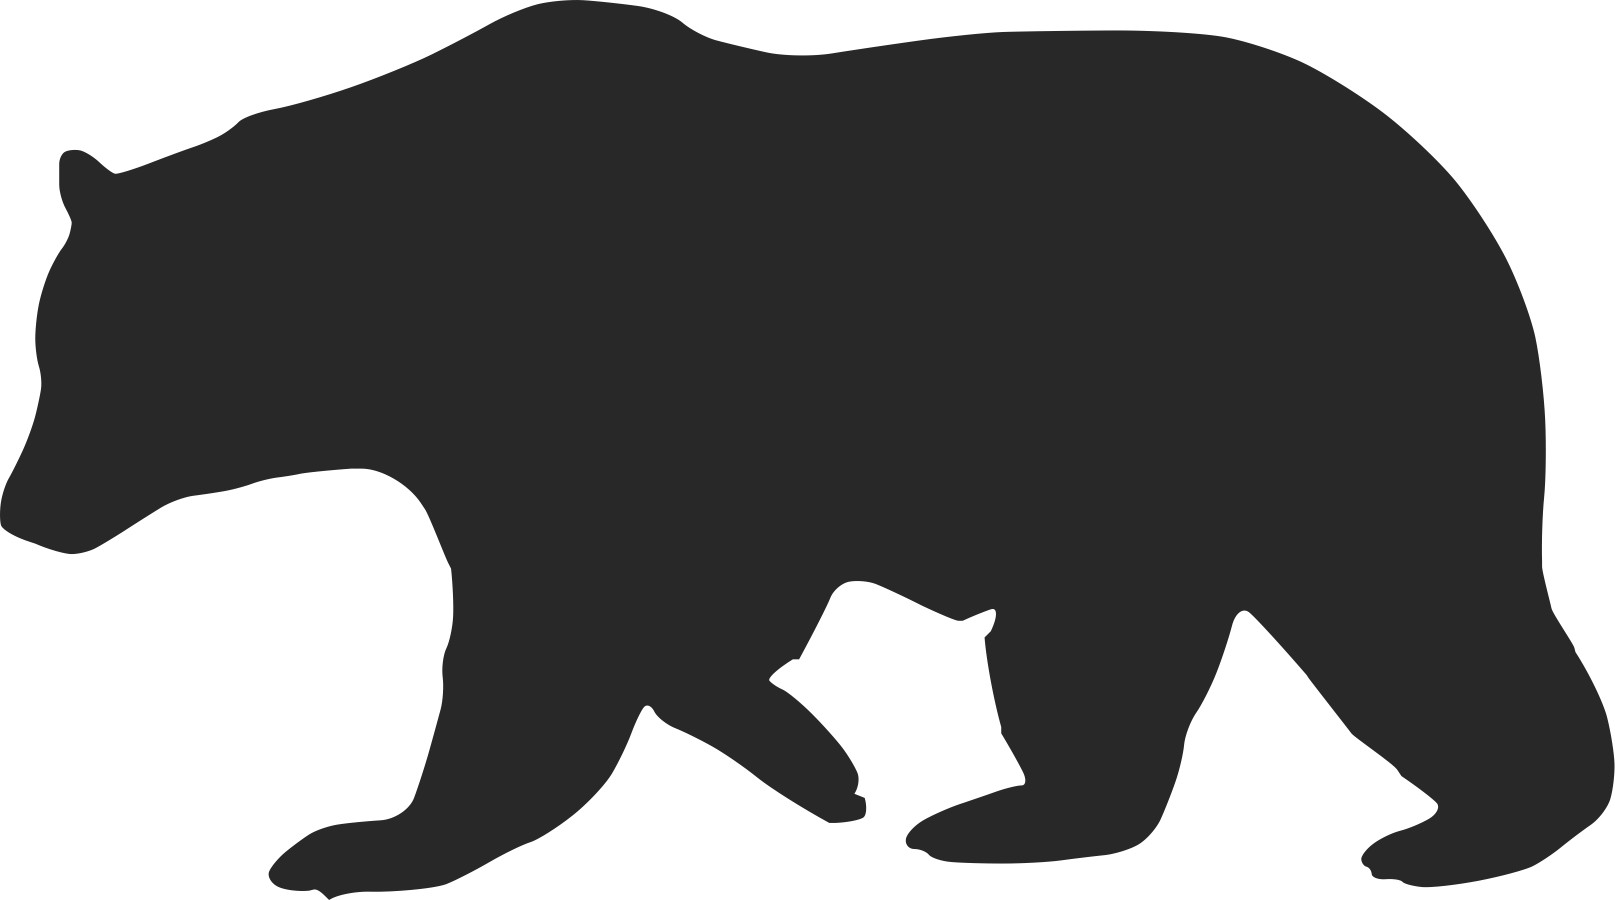 Grizzly Bear Clipart - Image 